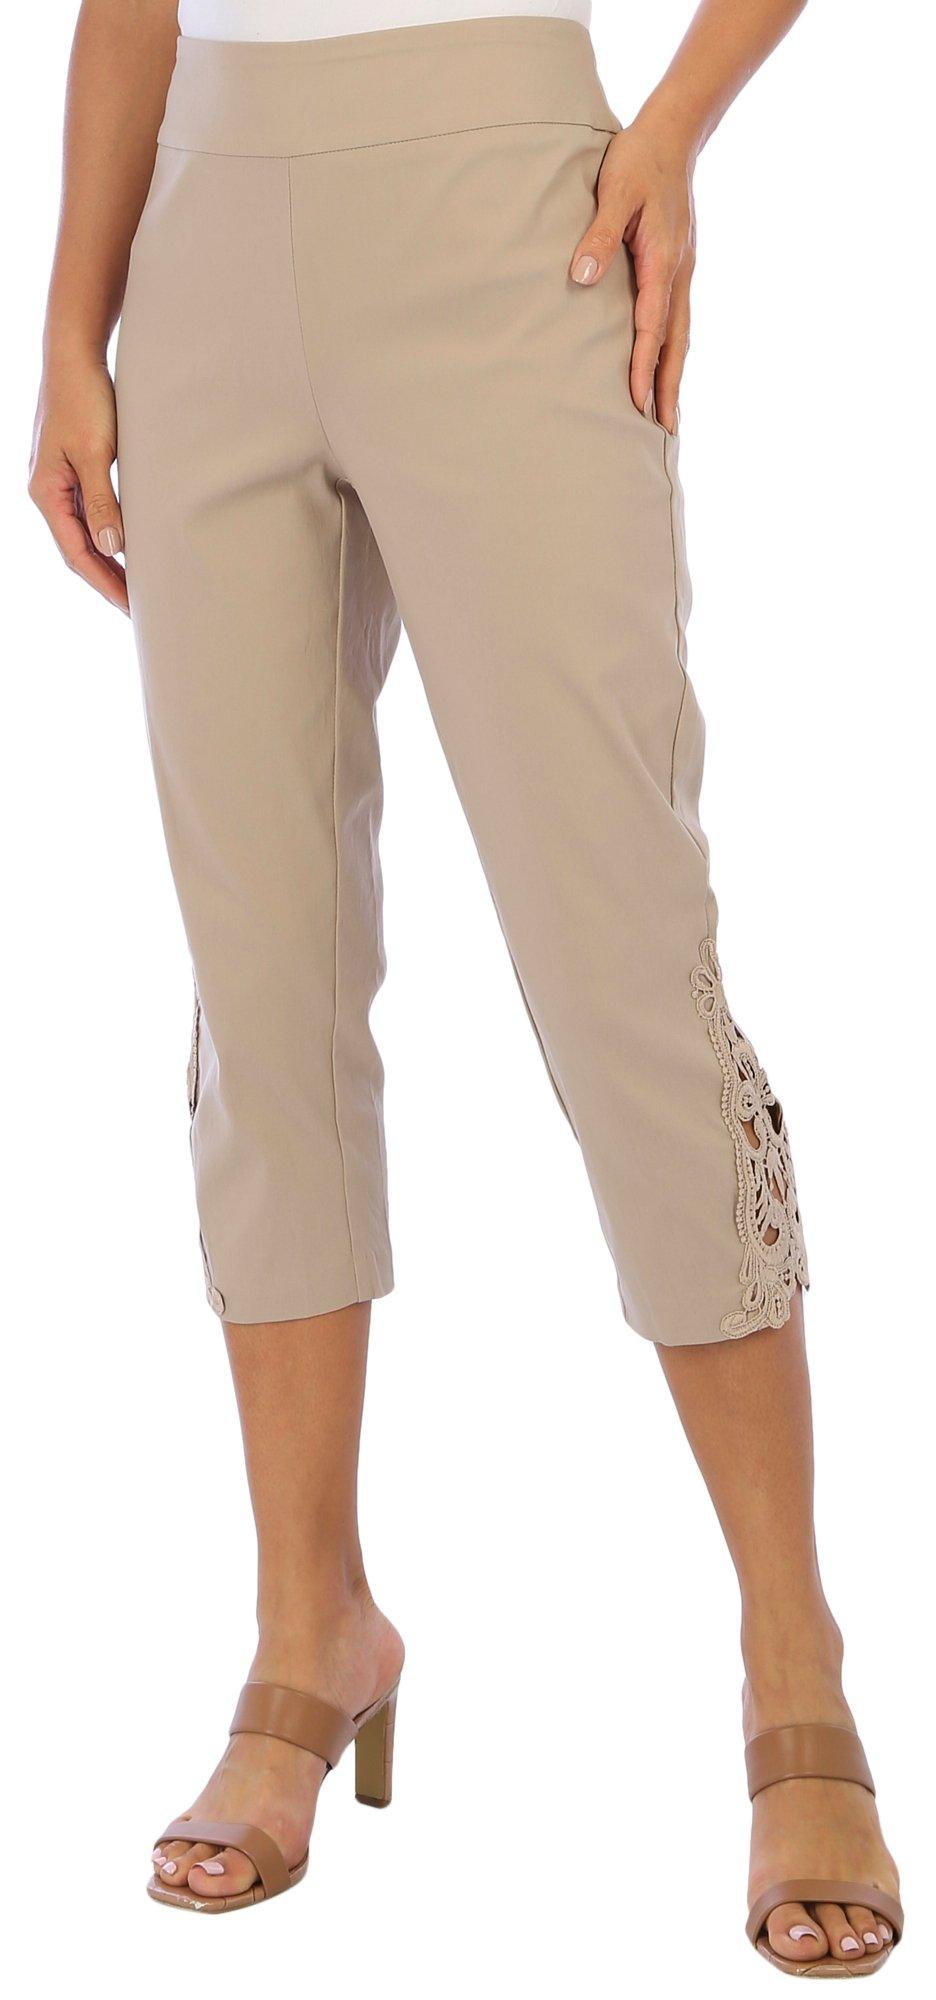 Juniper + Lime Womens 22 in. Solid Lace Capris